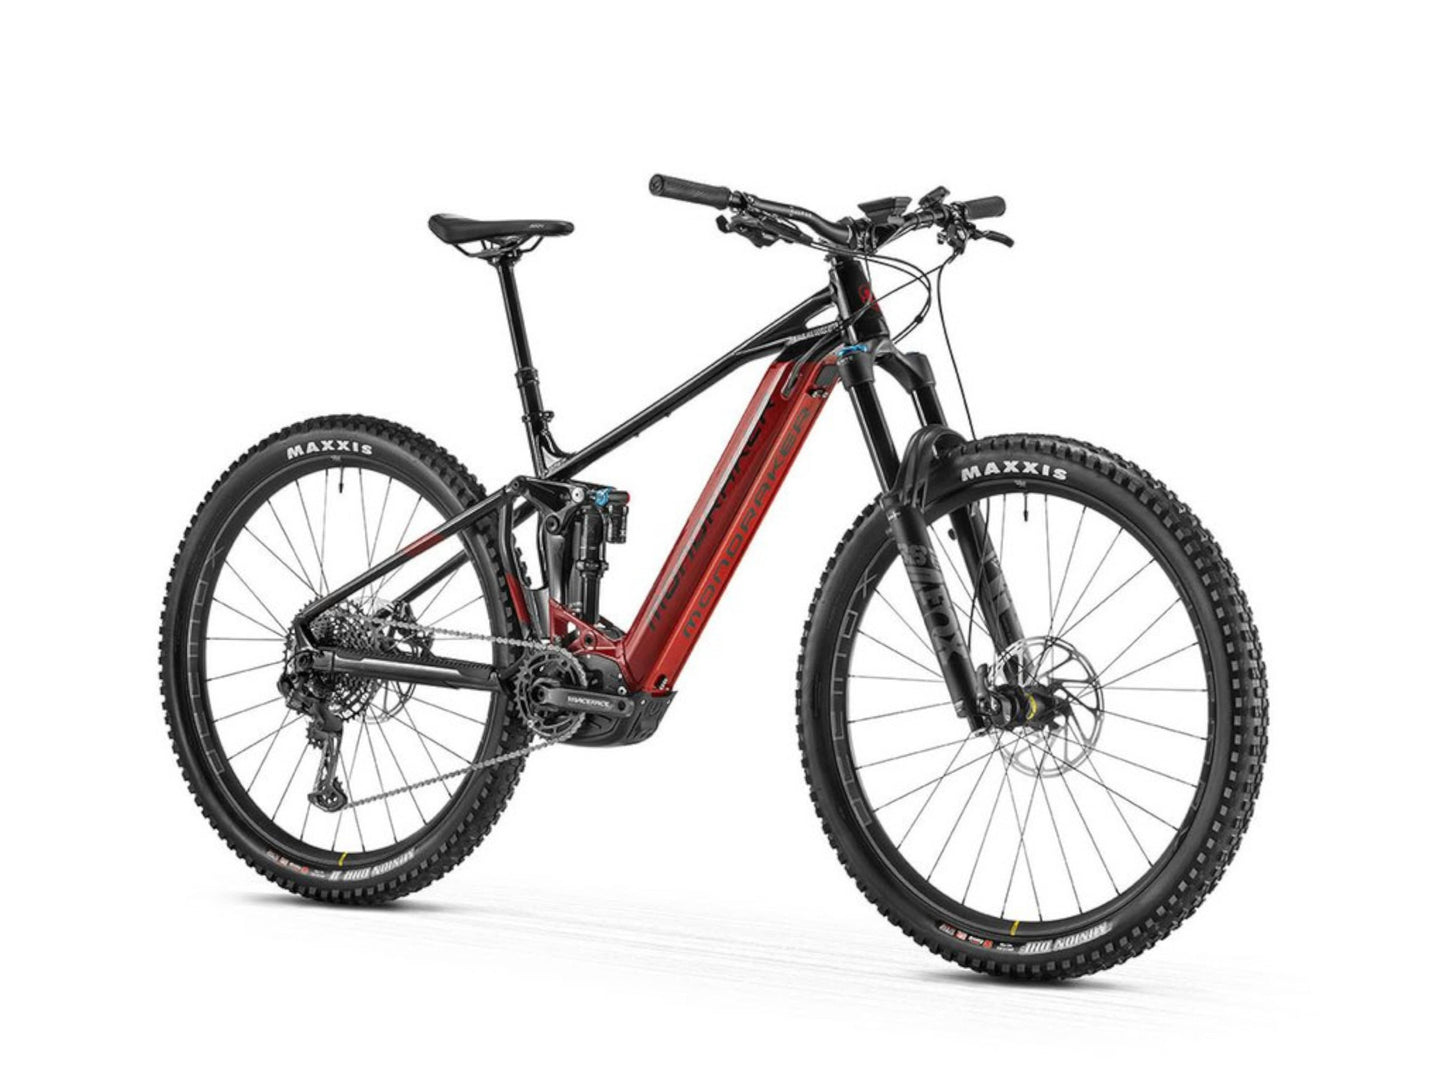 Mondraker Crafty R electric mountain bike black and cherry front quarterview on white background on Fly Rides